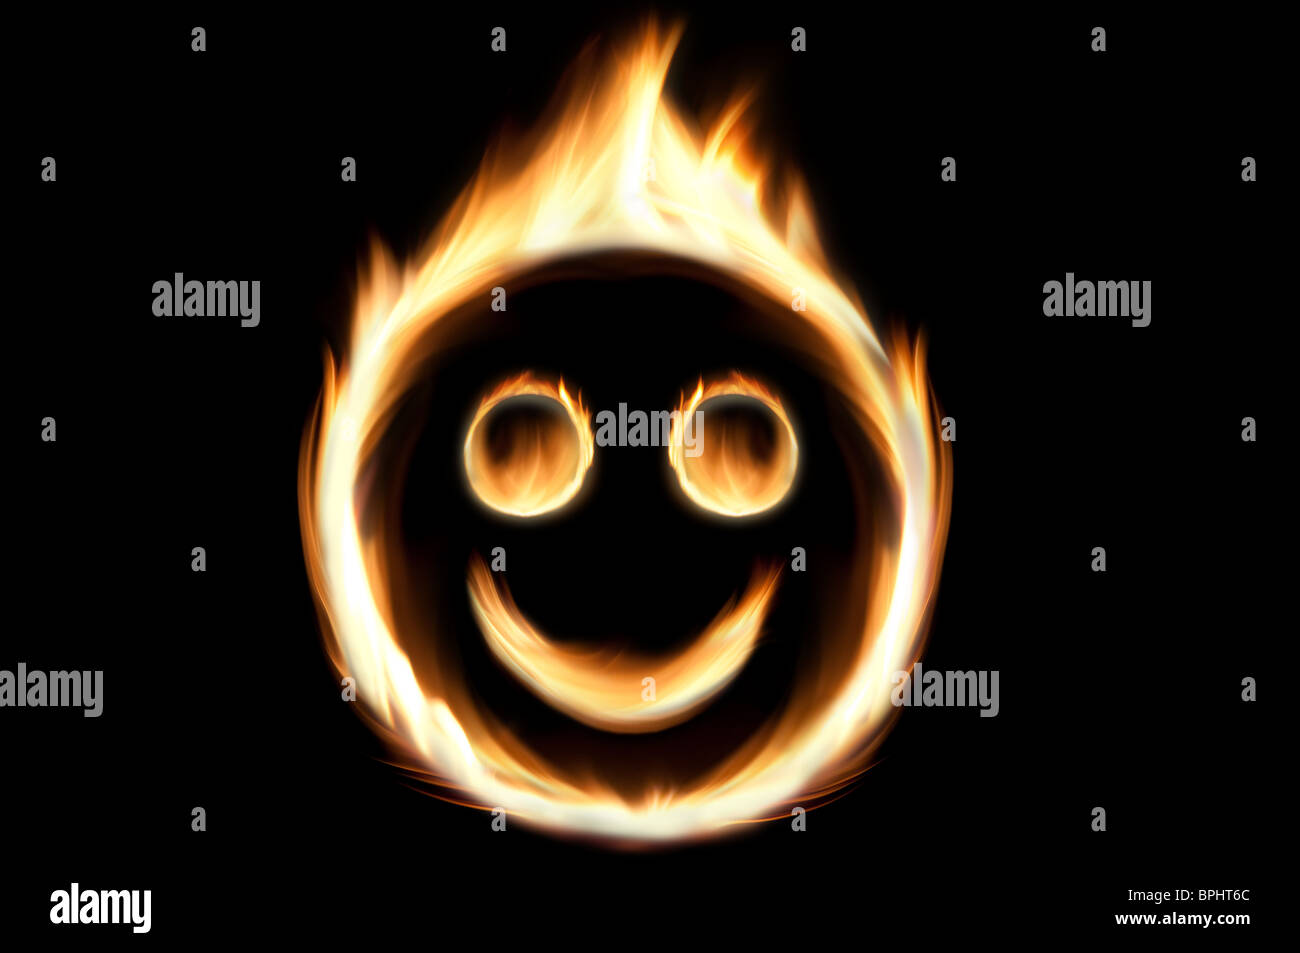 Fire smiley - fire flames in shape of a smiling face. Stock Photo